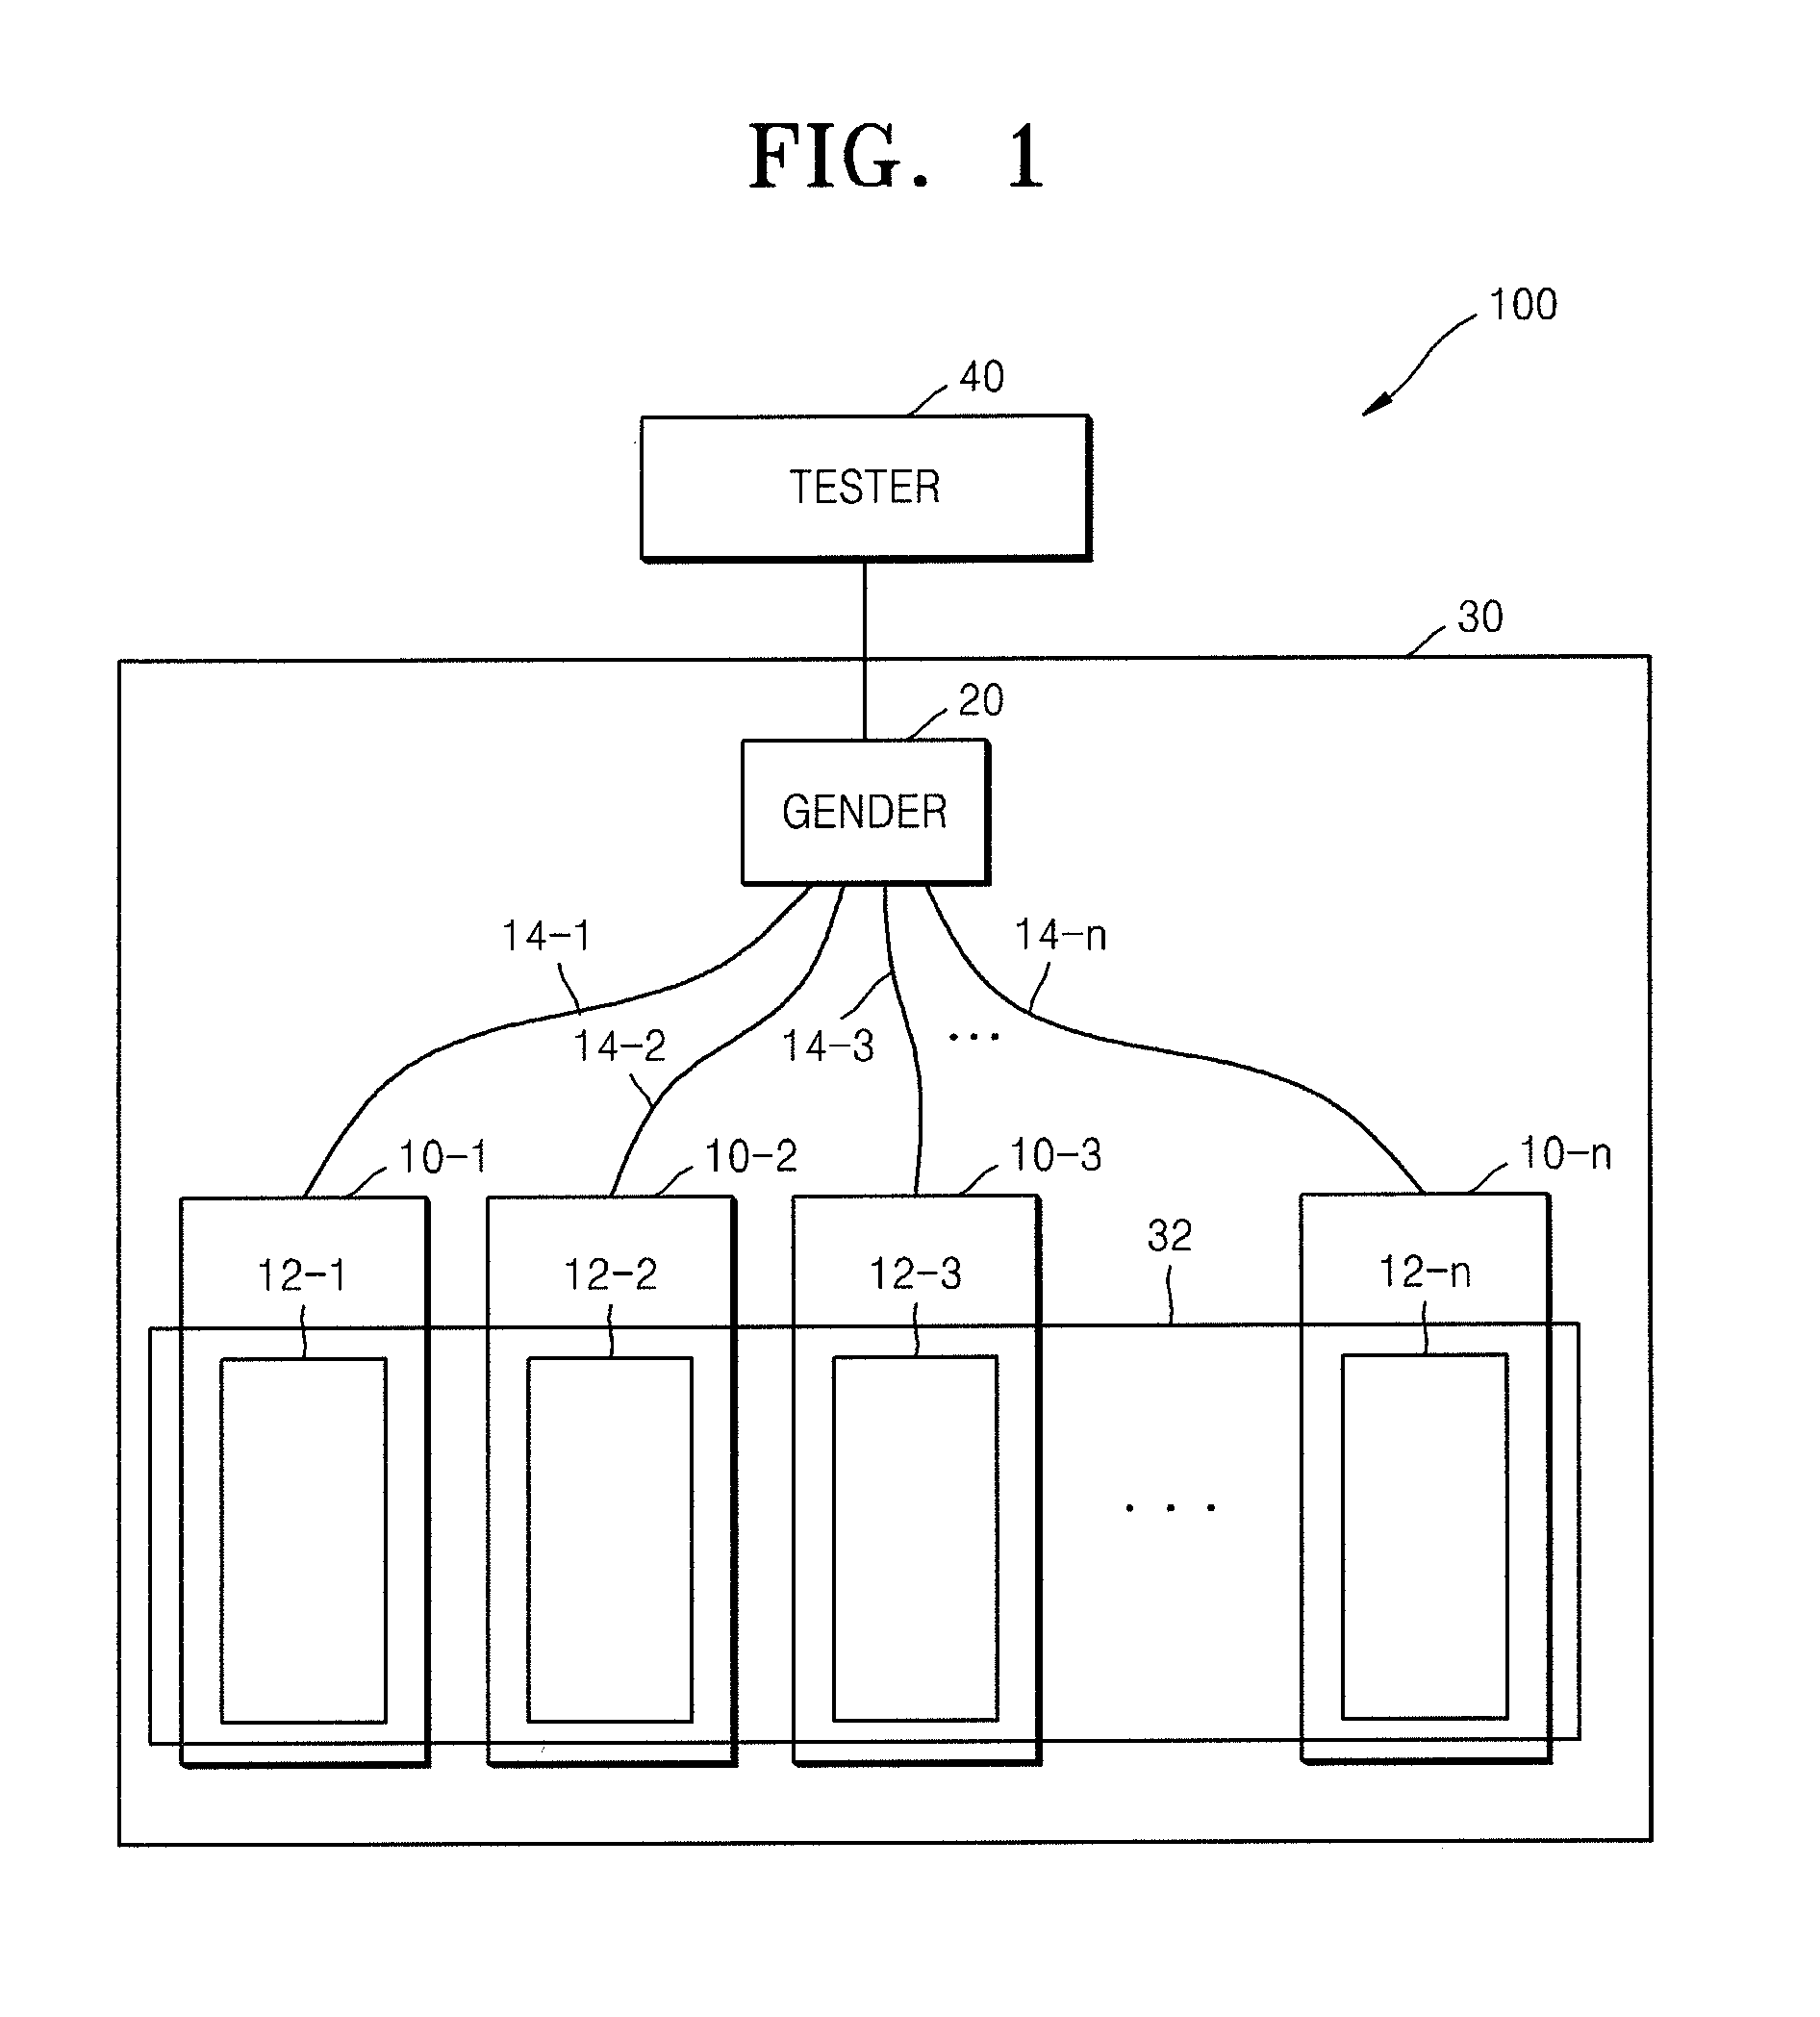 Method of testing data storage devices and a gender therefor